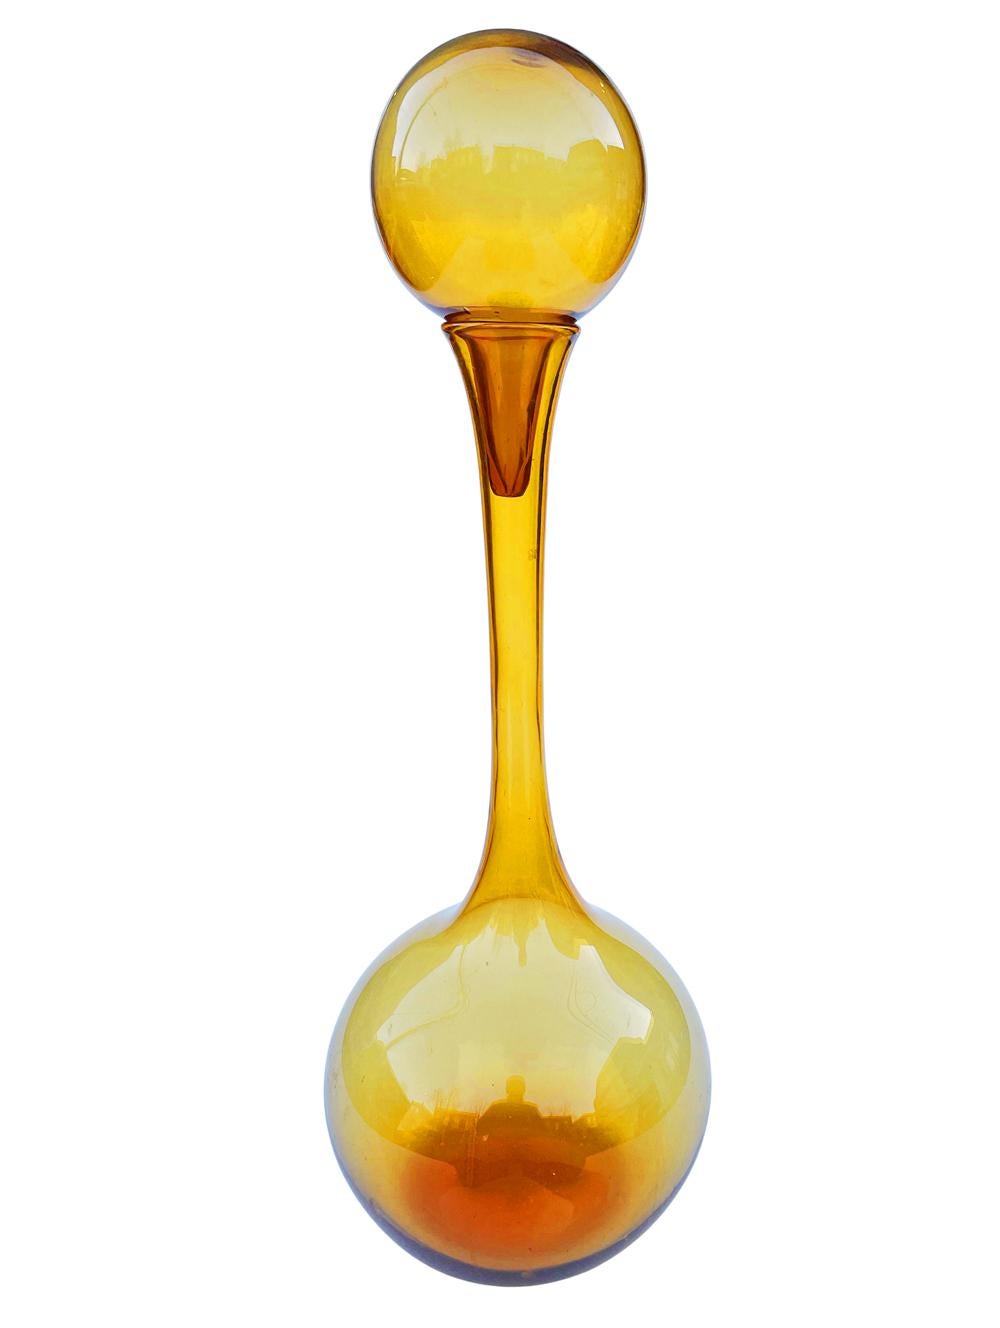 A massive and impressive glass decanter attributed to Empoli in Italy. Very much in the style of Blenko Glass. It consists of sculptural handblown amber glass with large stopper.